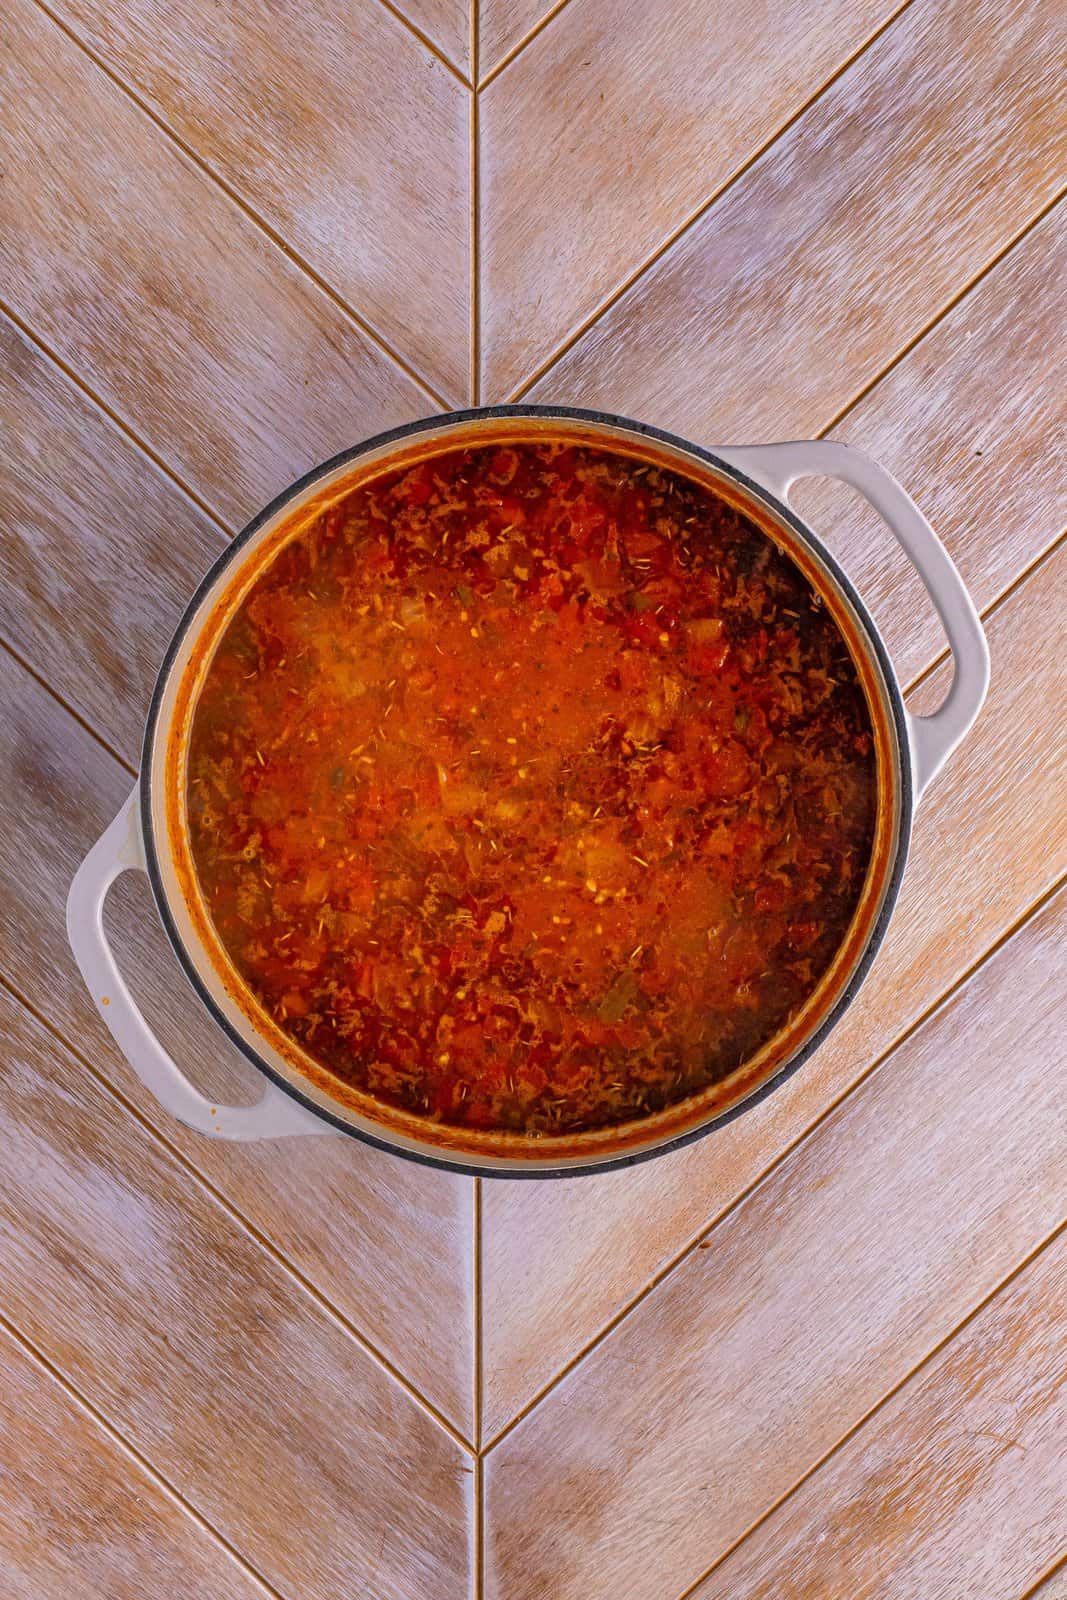 A pot with red tomato based soup in it.